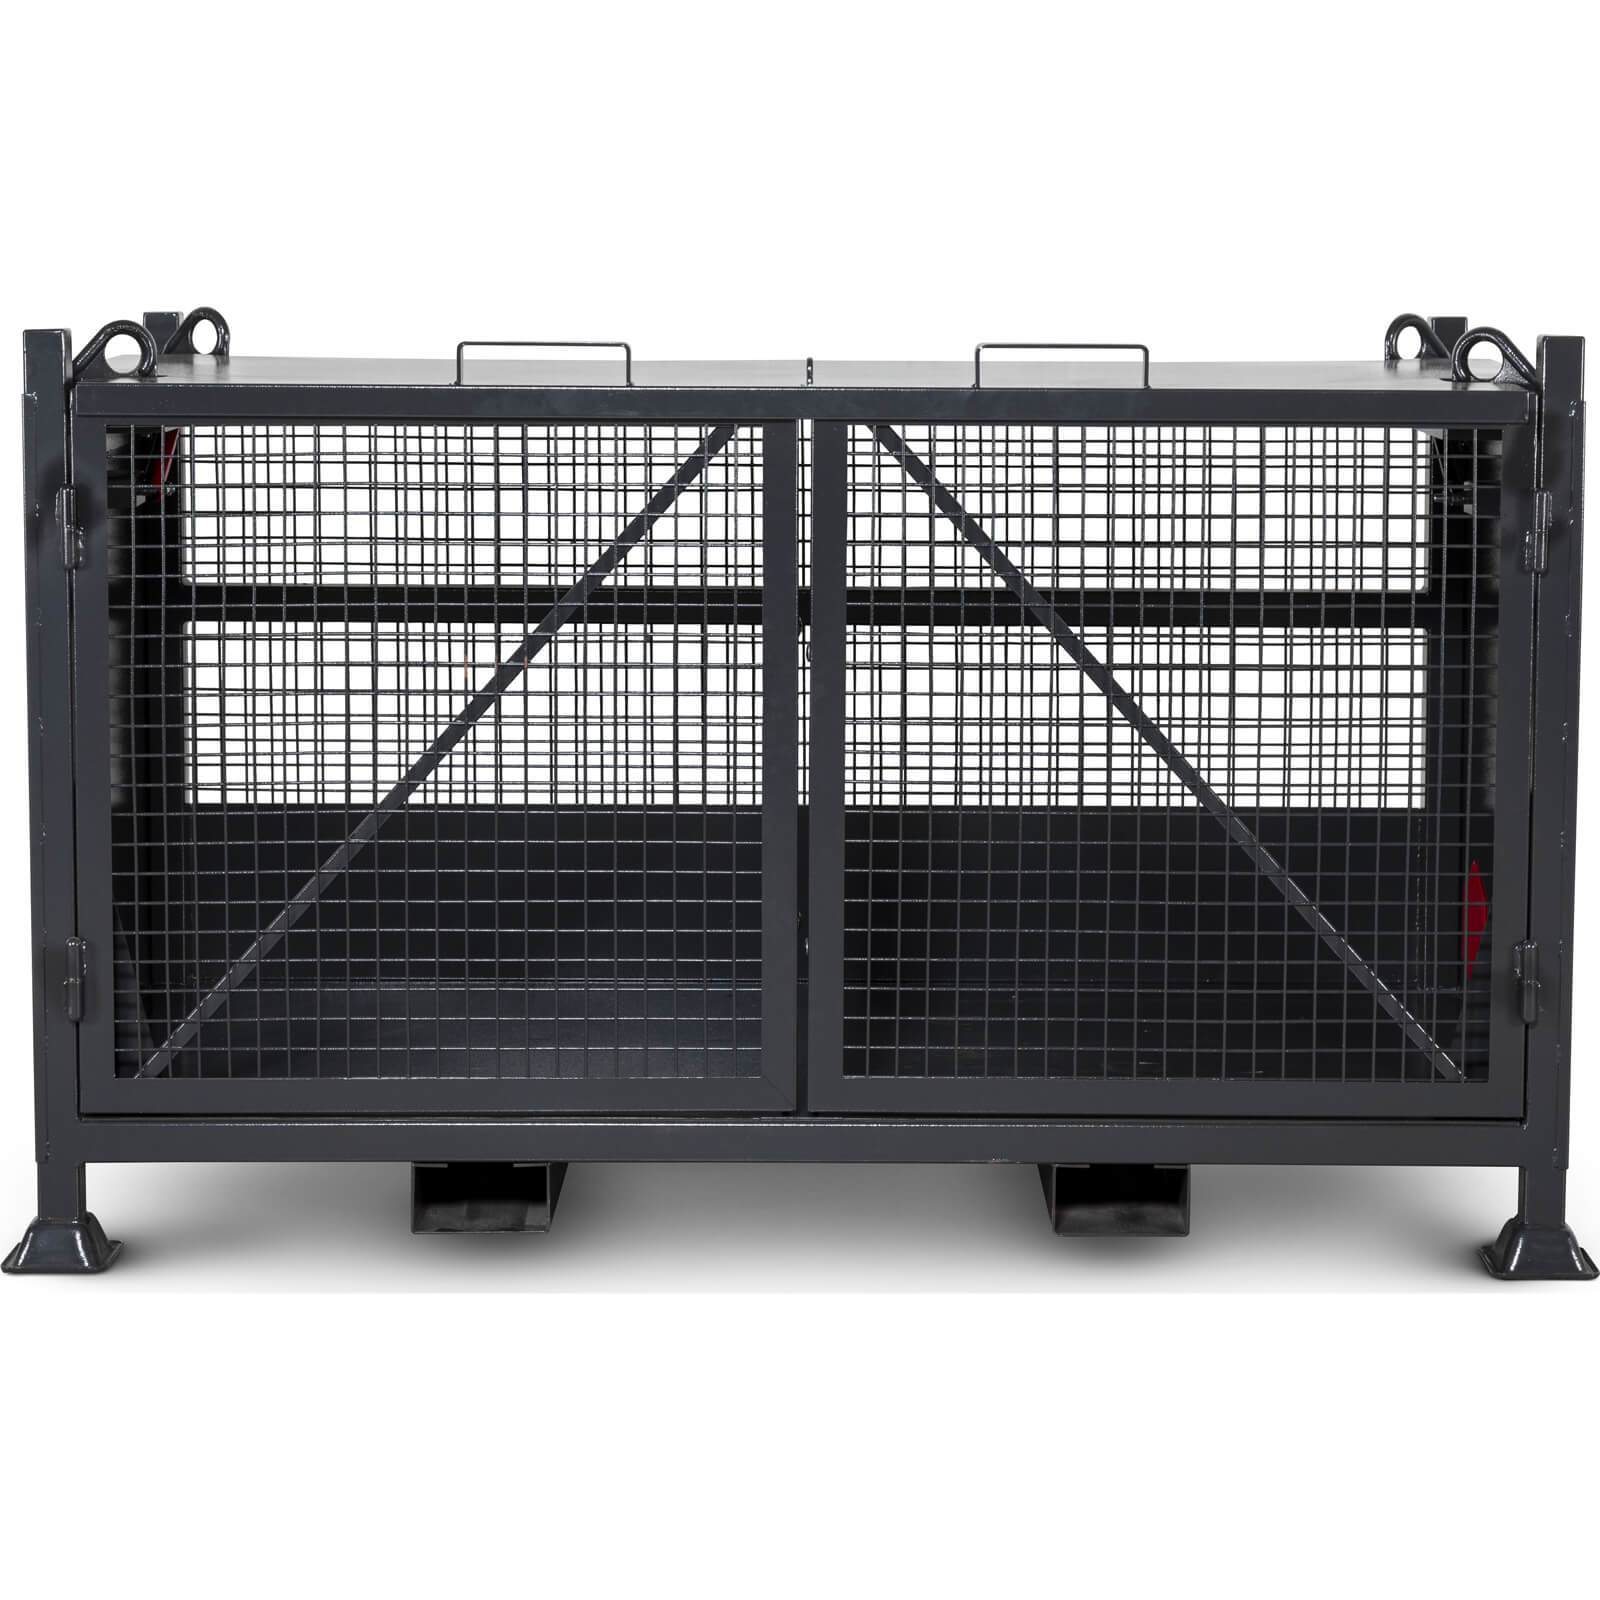 Photos - Tool Box Armorgard Tuffcrate Site Storage Cage 1800mm 800mm 845mm TC750 